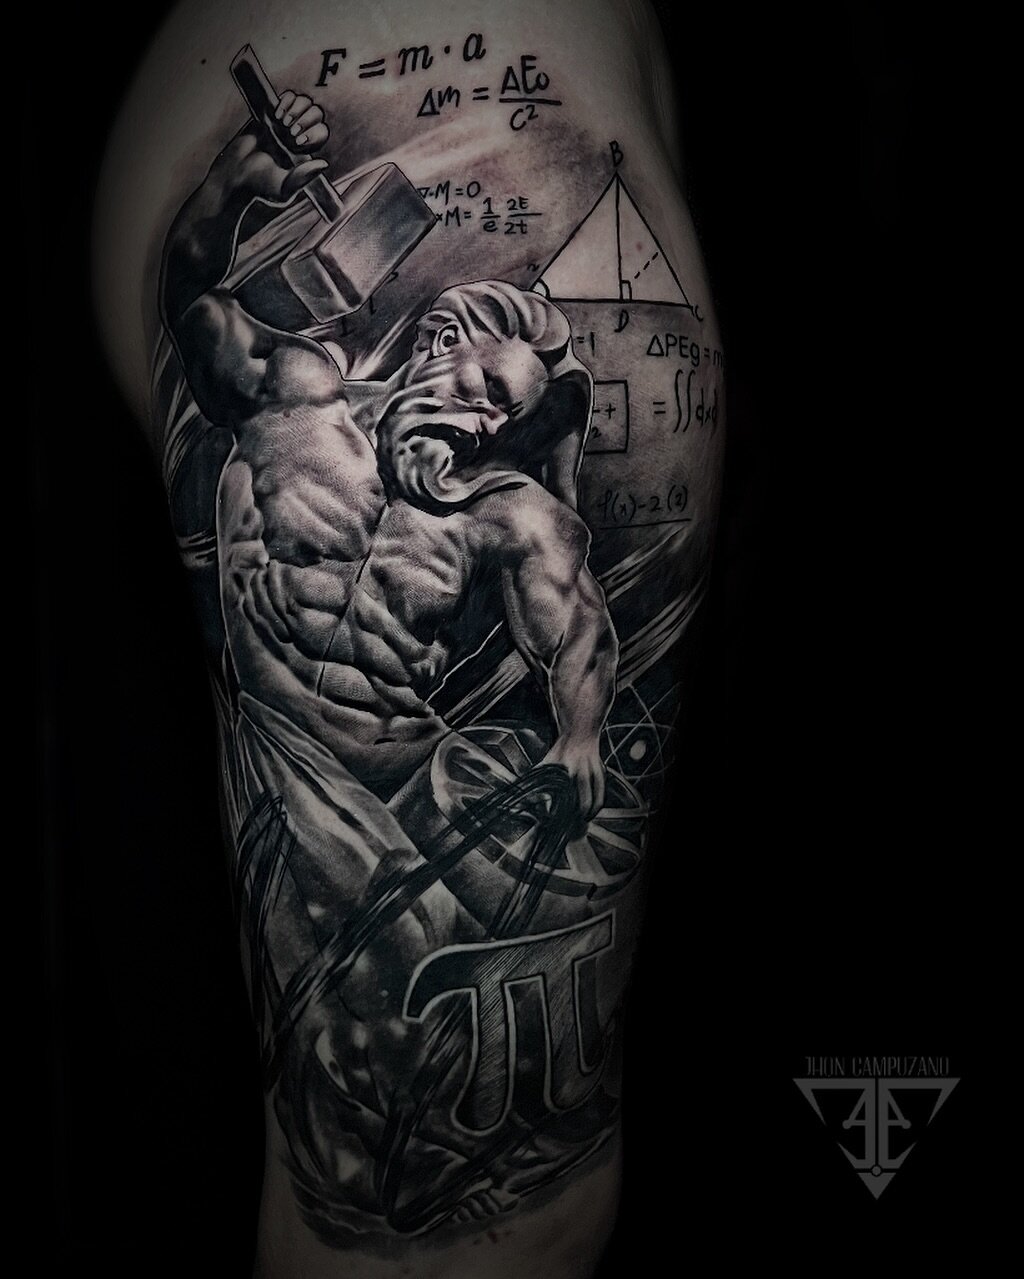 Tattoo done by @jhoncampuzanotattoo 

Jhon is now taking appointments for March and April to book contact him directly by filling an application on his website 
www.Jhoncampuzanotattoos.com